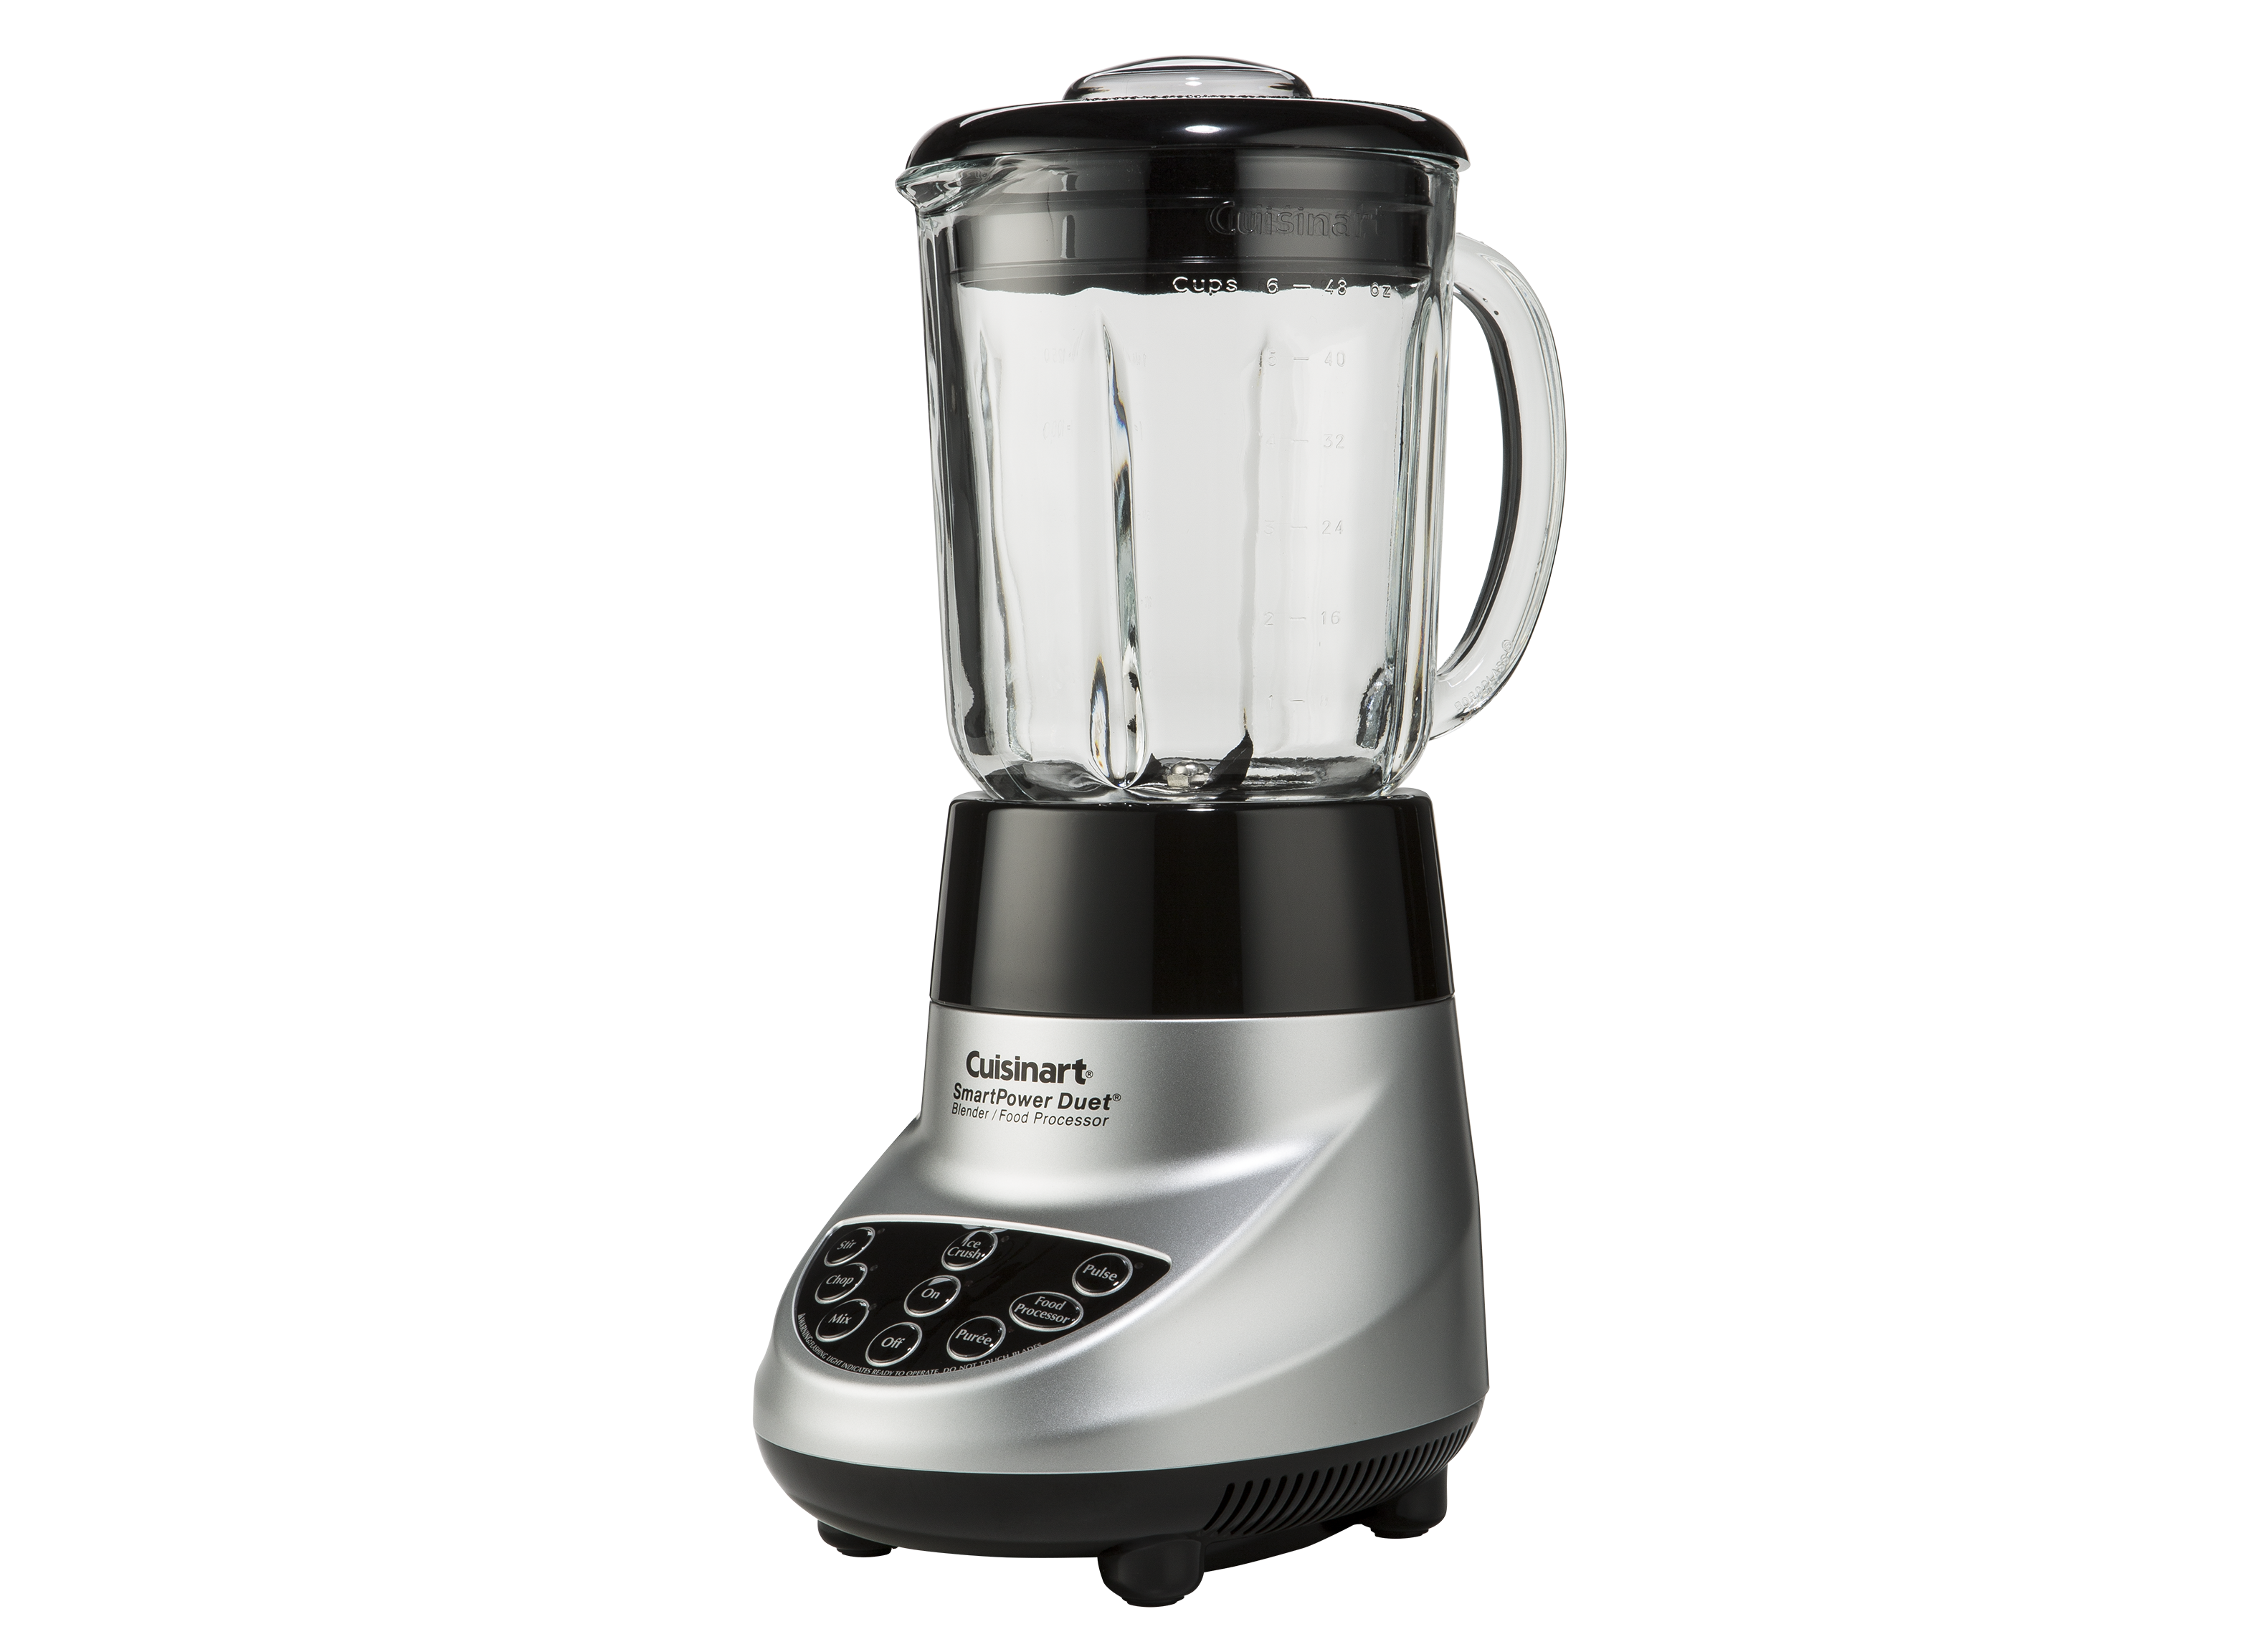 https://crdms.images.consumerreports.org/prod/products/cr/models/389555-blenders-cuisinart-smartpowerduetbfp703bc.png